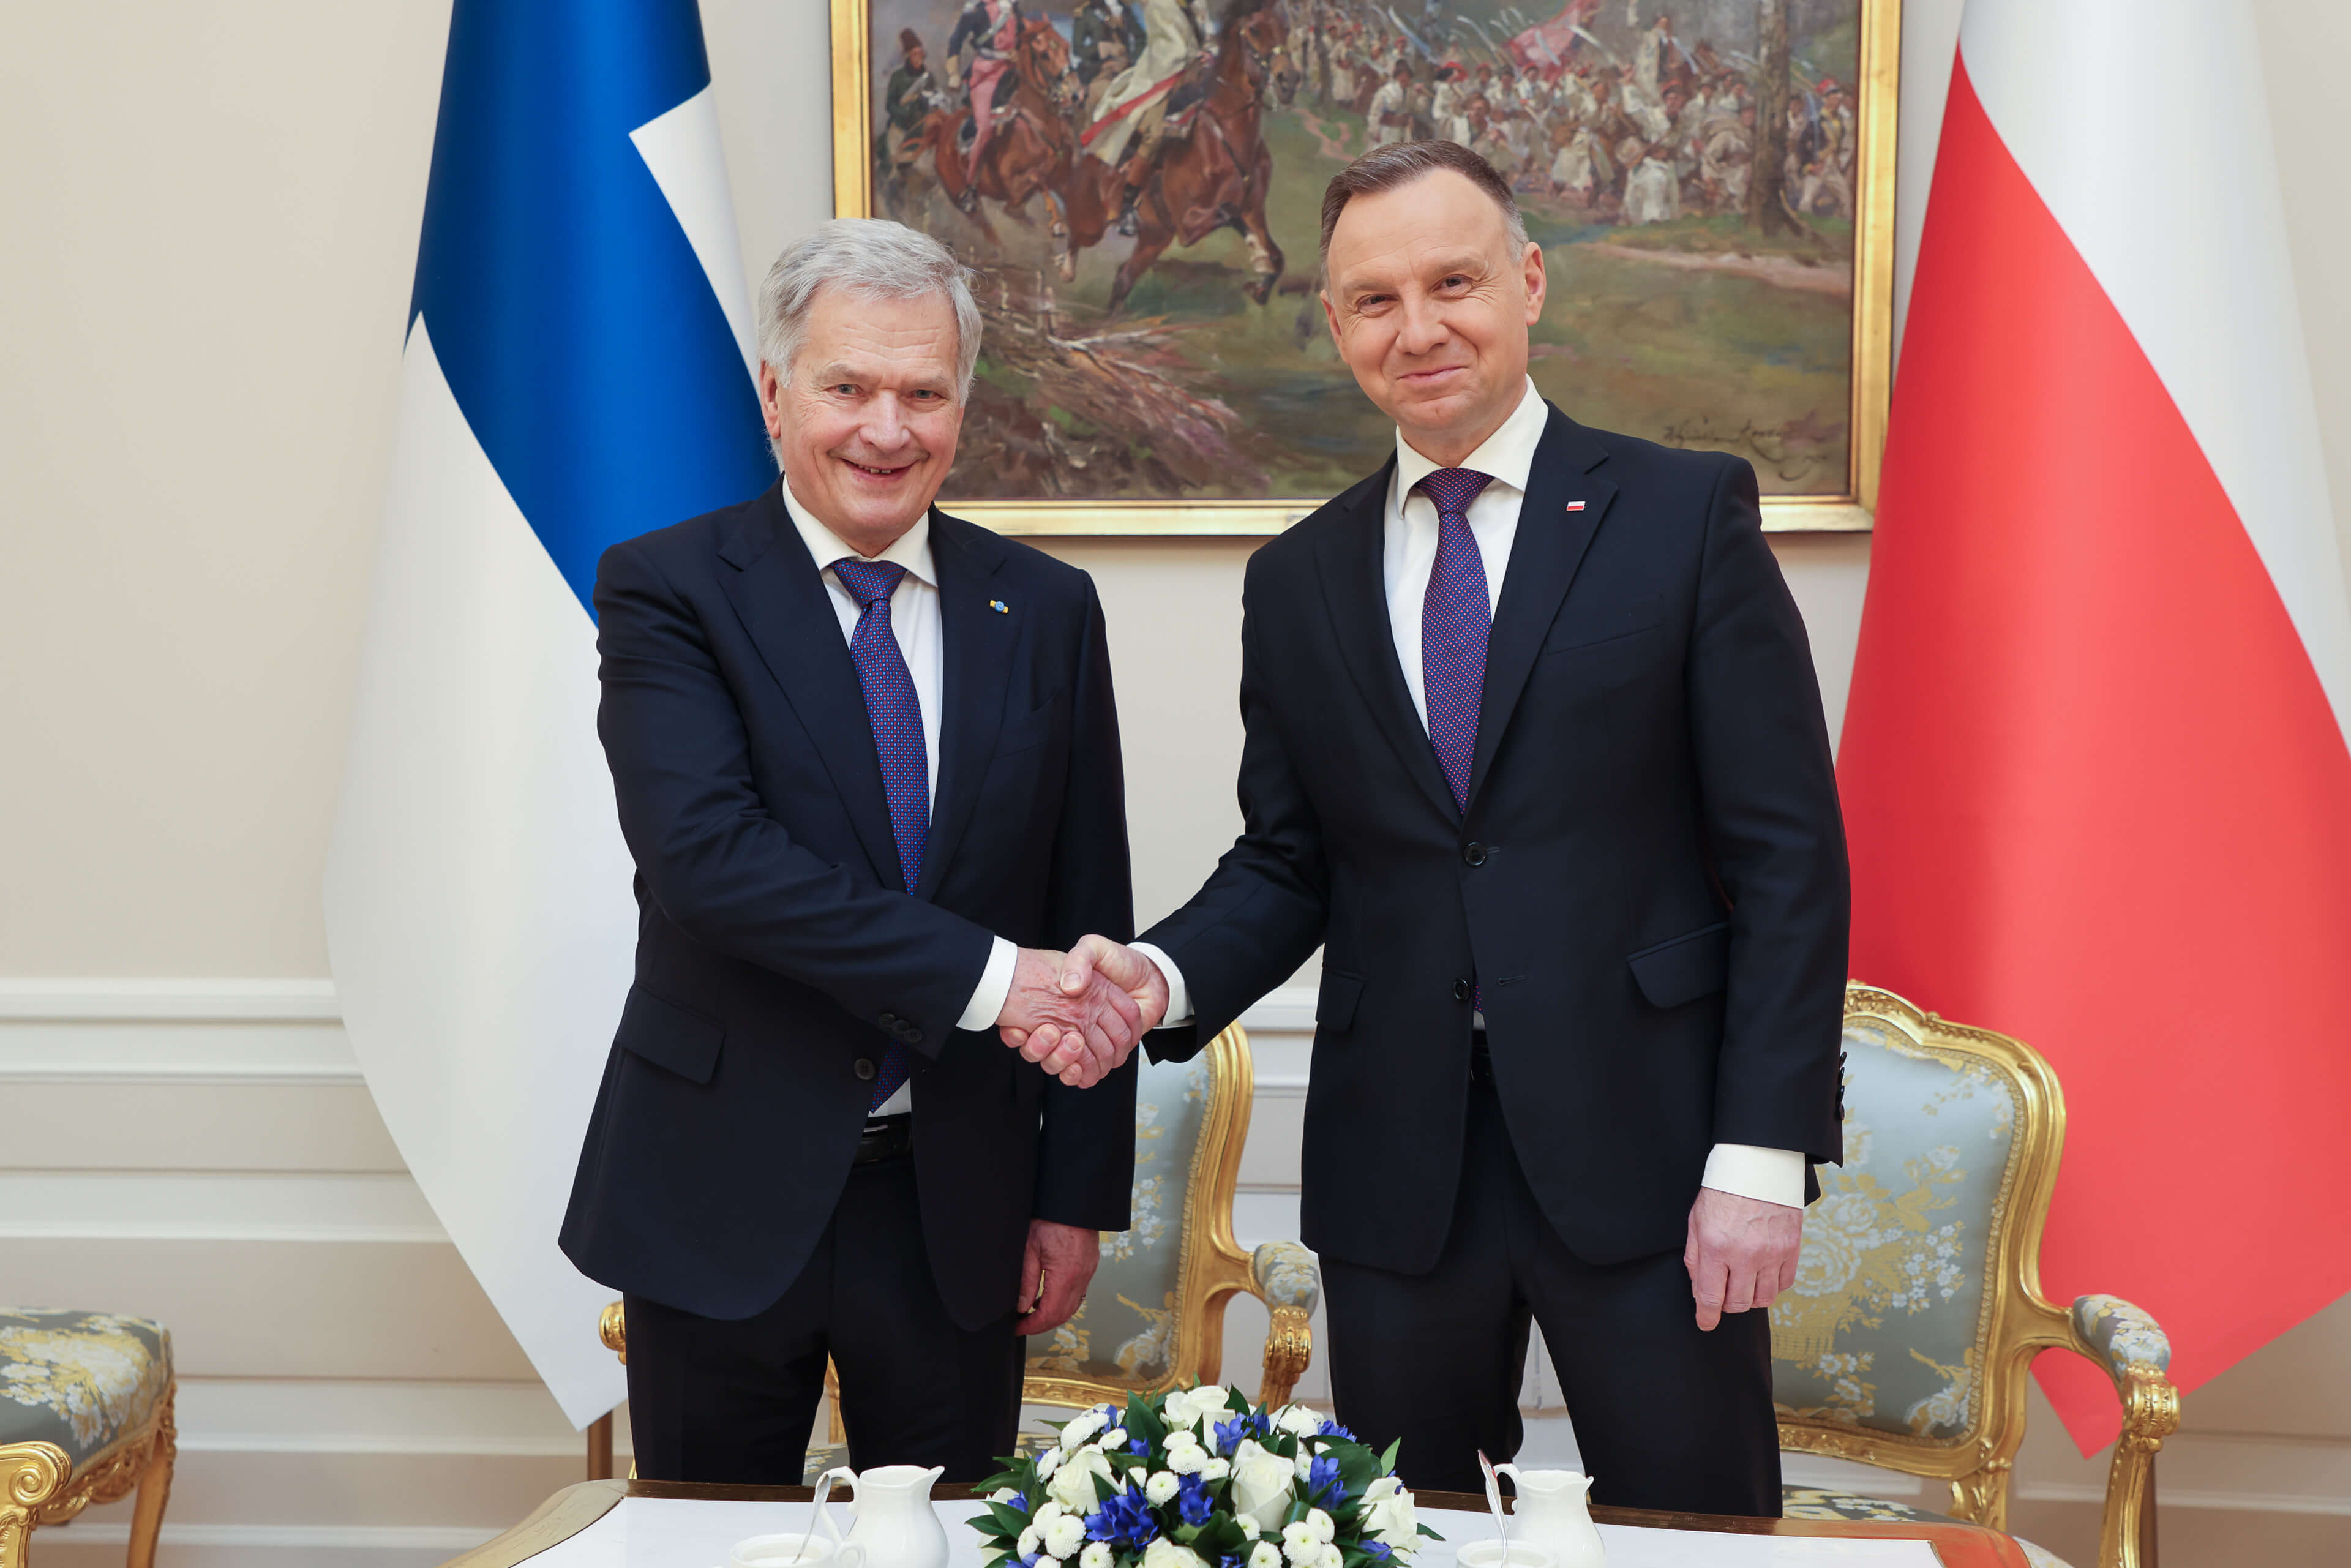 Presidents of Finland and Poland 